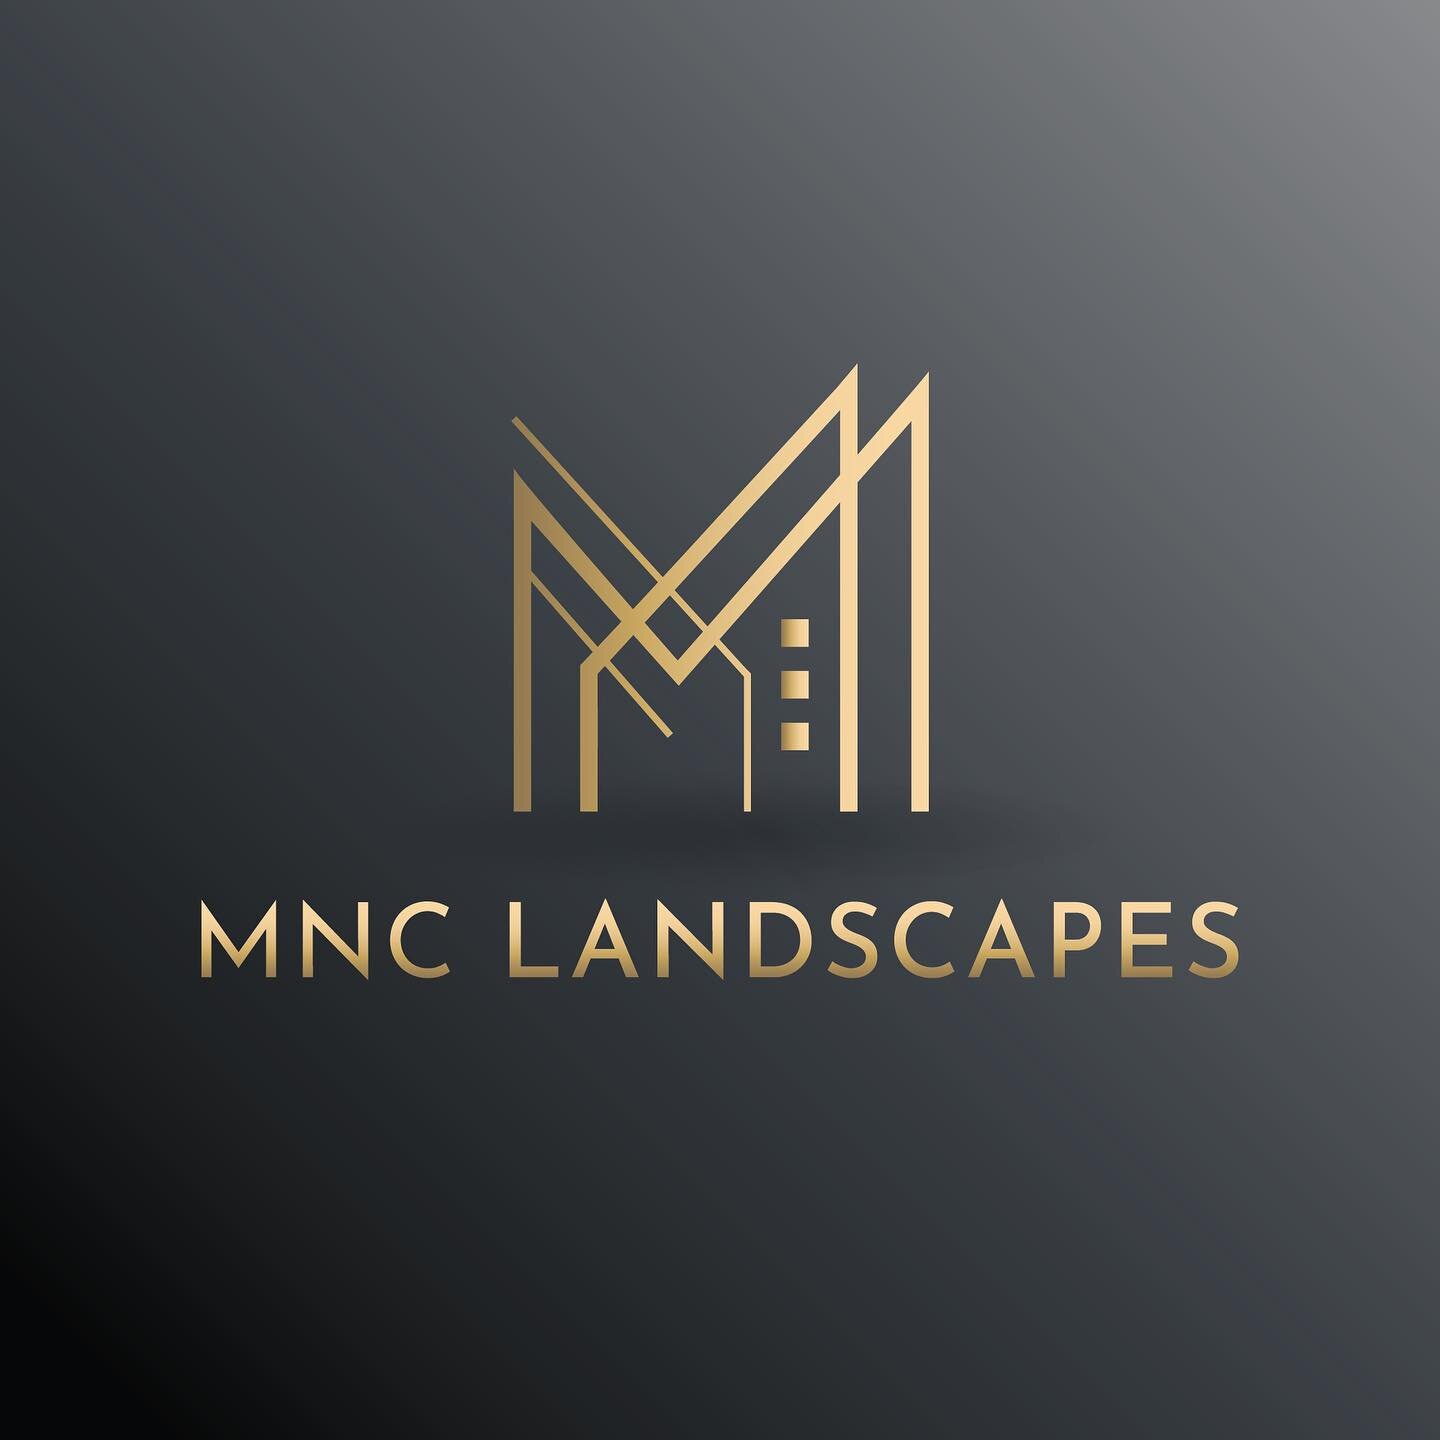 𝗟𝗢𝗚𝗢 𝗥𝗘𝗩𝗜𝗦𝗜𝗢𝗡 𝗣𝗔𝗖𝗞𝗔𝗚𝗘 ✨

SWIPE TO SEE THE BEFORE VERSION.

@mnclandscapes approached me seeking a refined version of a design they&rsquo;d already created, they were hoping to keep the same elements, but aiming for a more polished 